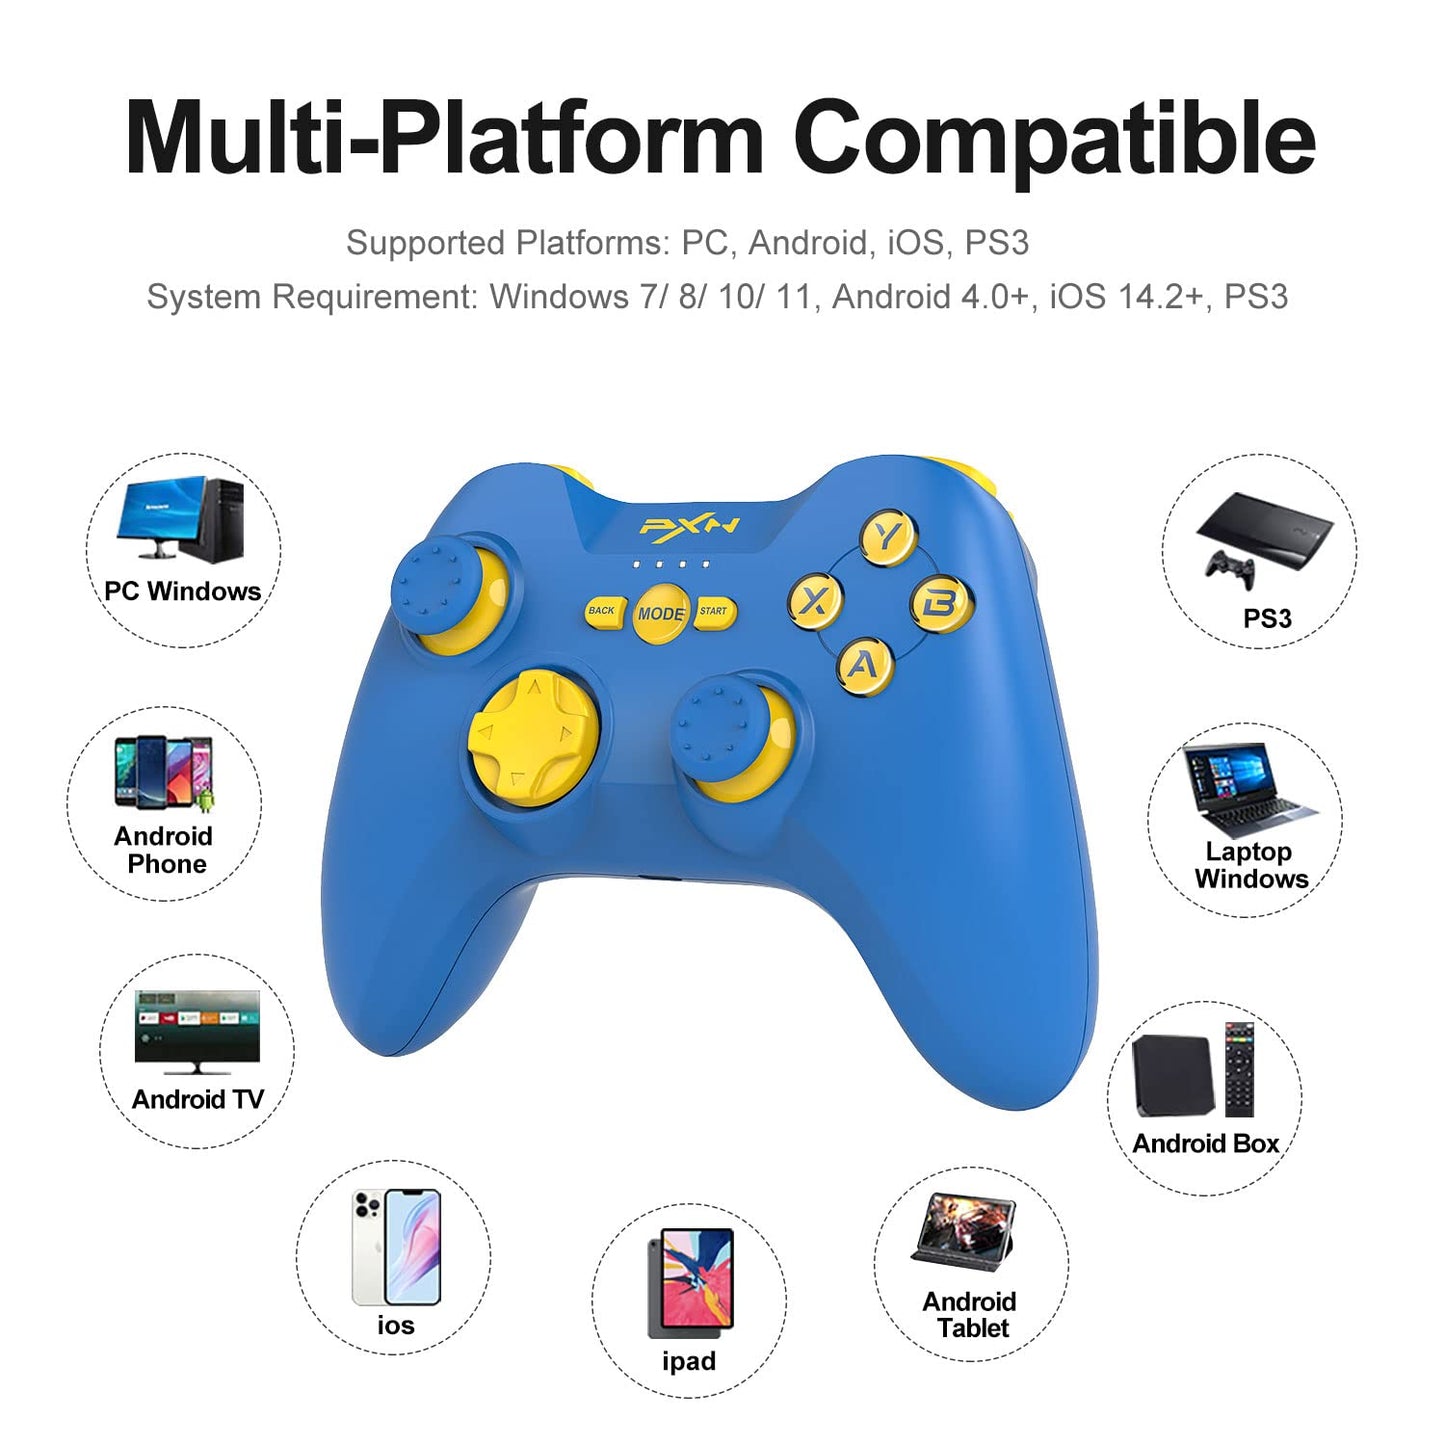 PXN P3 Portable Wireless/USB Connection Game Controller for PC, Android, PS3 Devices (Blue, Gray)